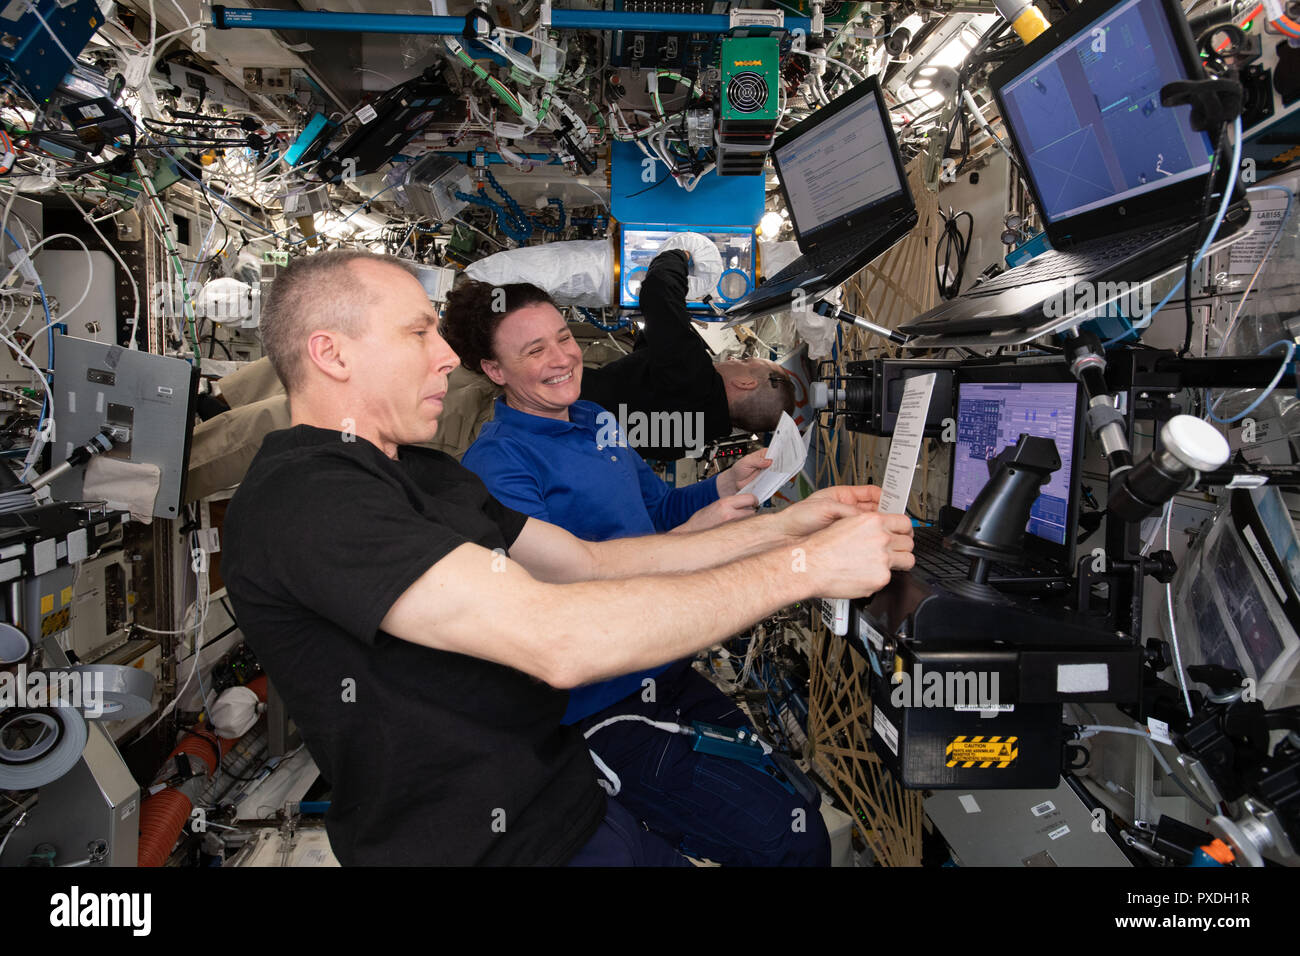 NASA astronauts Drew Feustel and Serena Aunon-Chancellor train on a computer in the U.S. Destiny laboratory practicing rendezvous procedures and robotics maneuvers ahead of the arrival of Japan's HTV-7 resupply ship September 6, 2018 in Earth Orbit. Stock Photo